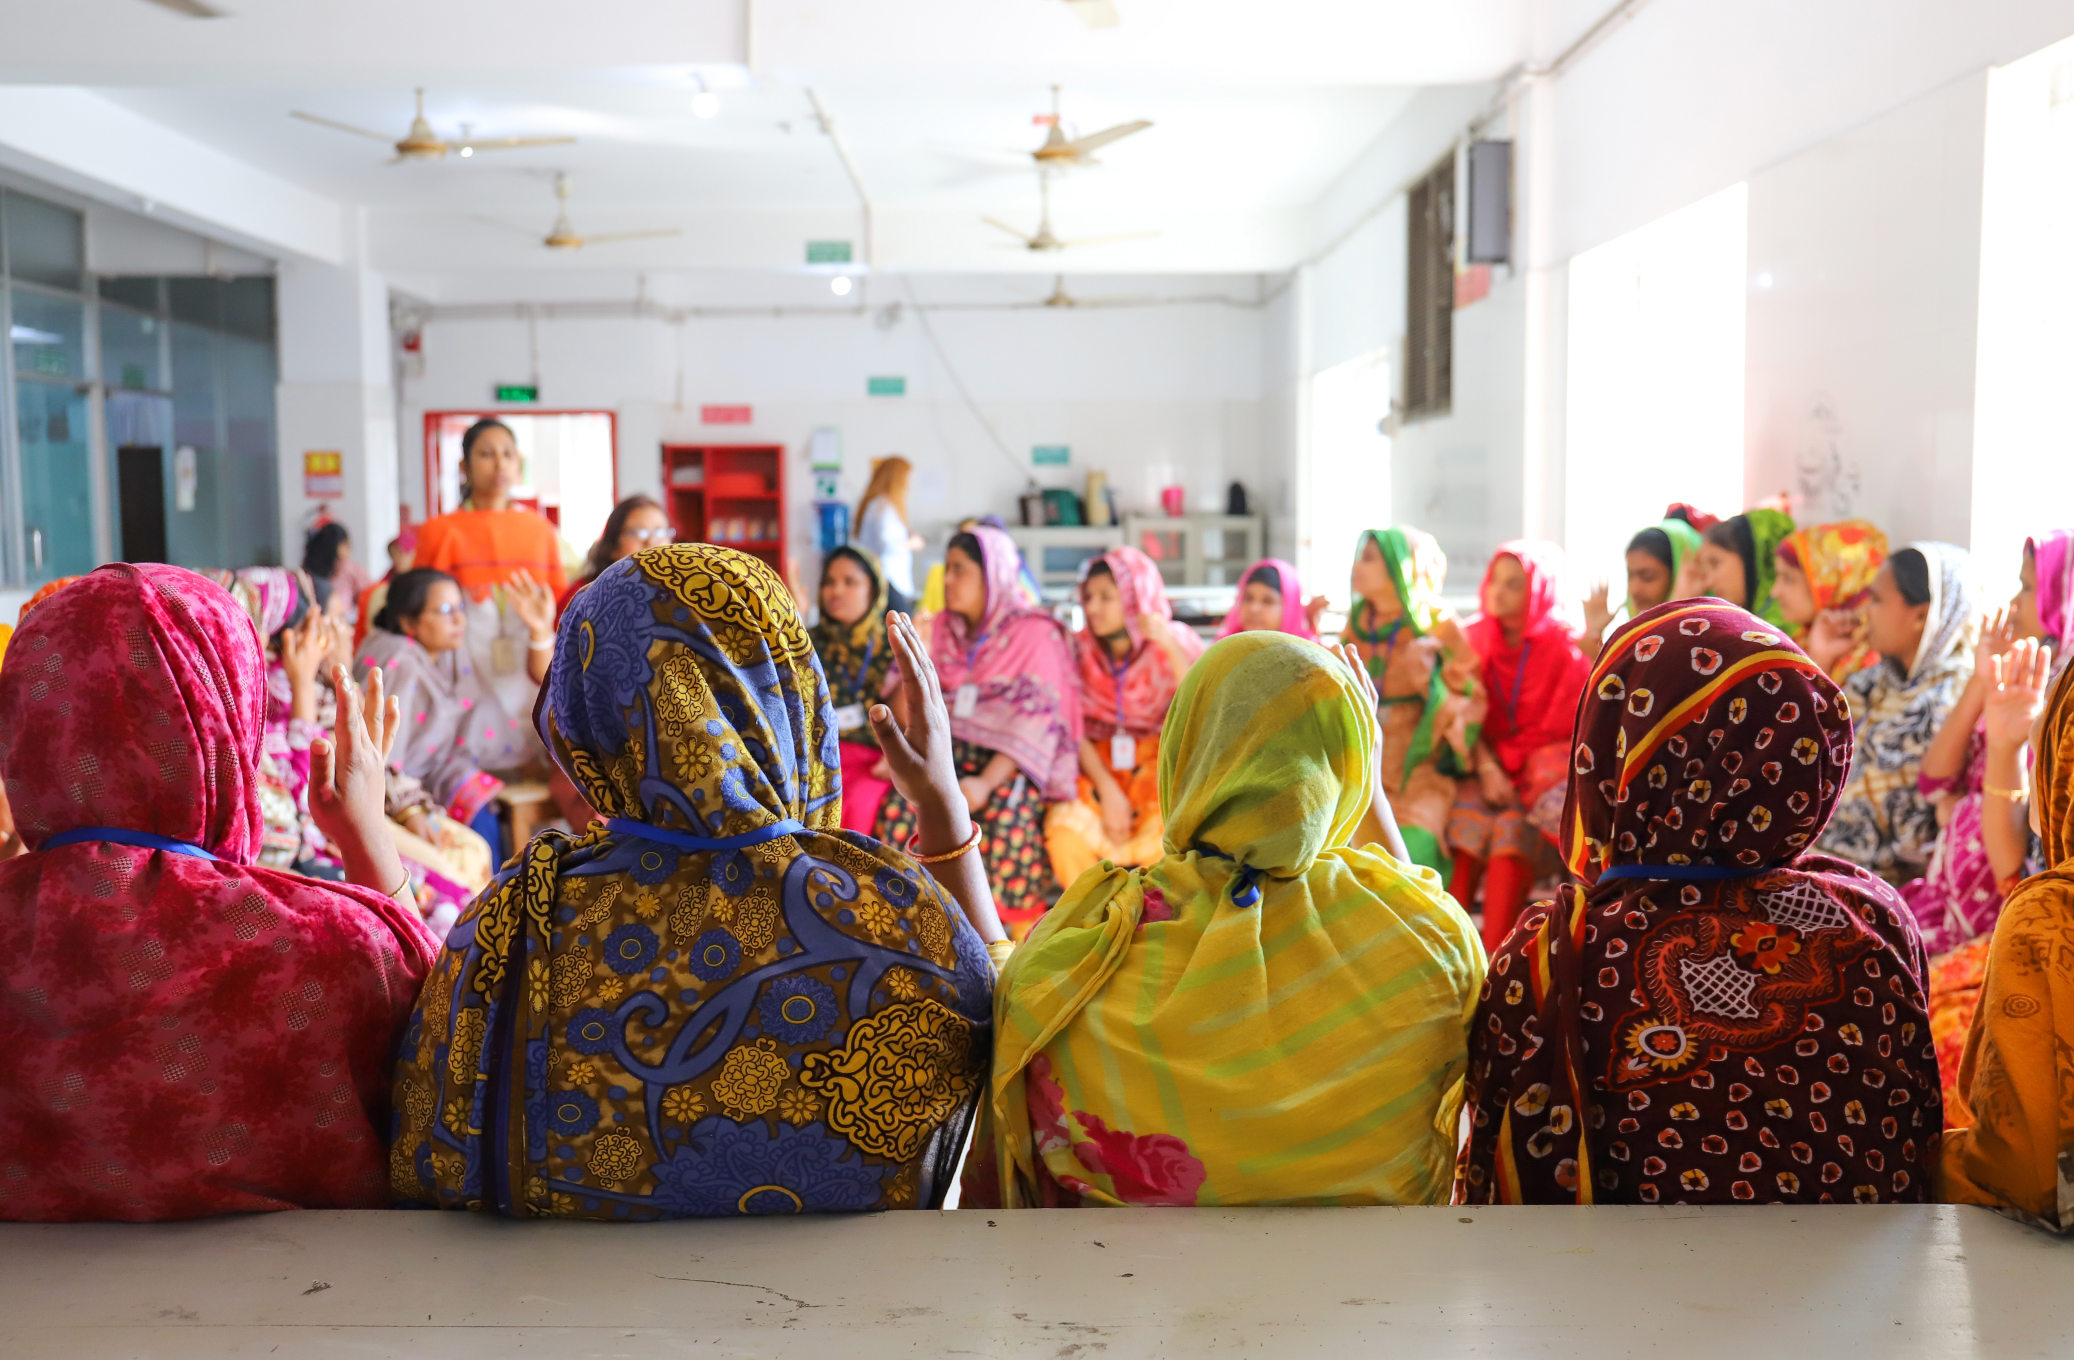 Reemi's MHM education in a garment factory